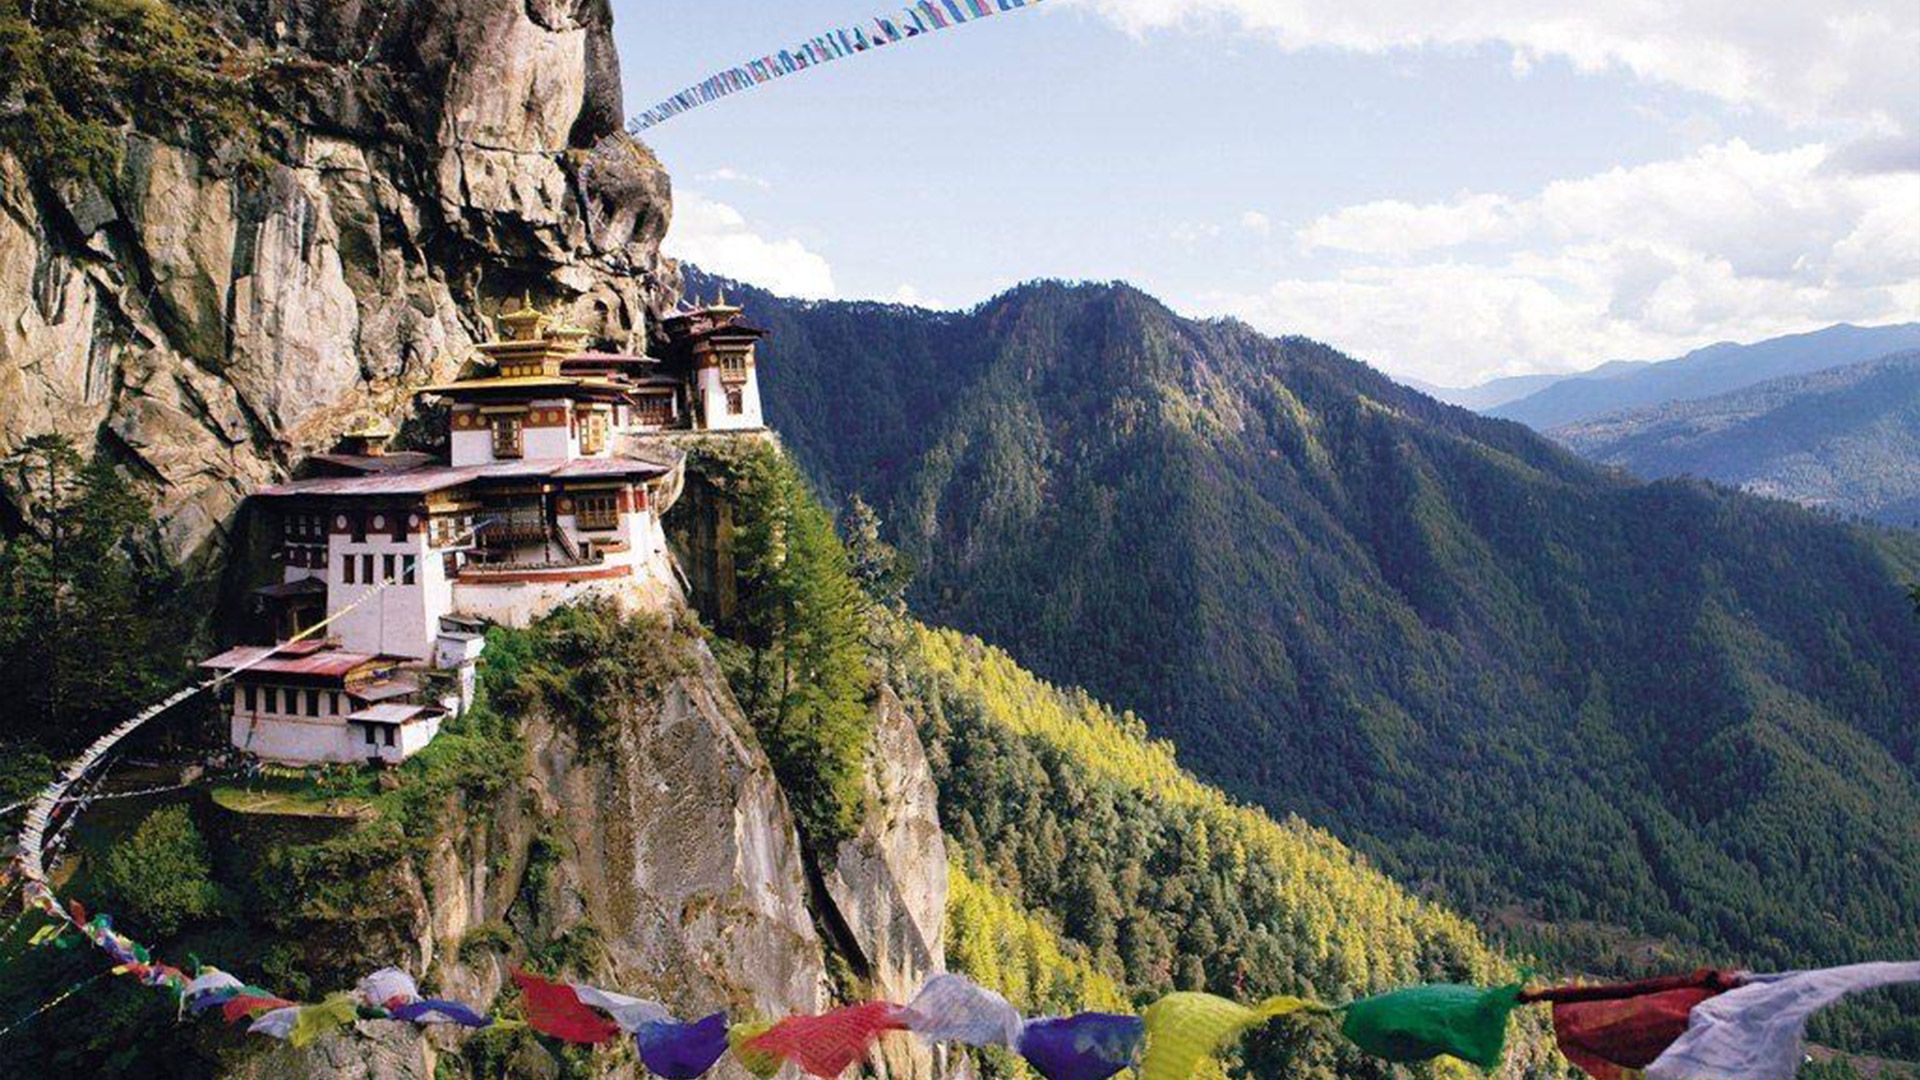 With PayPorter, you can make fast, easy and safe money transfers to Bhutan at the most affordable prices!